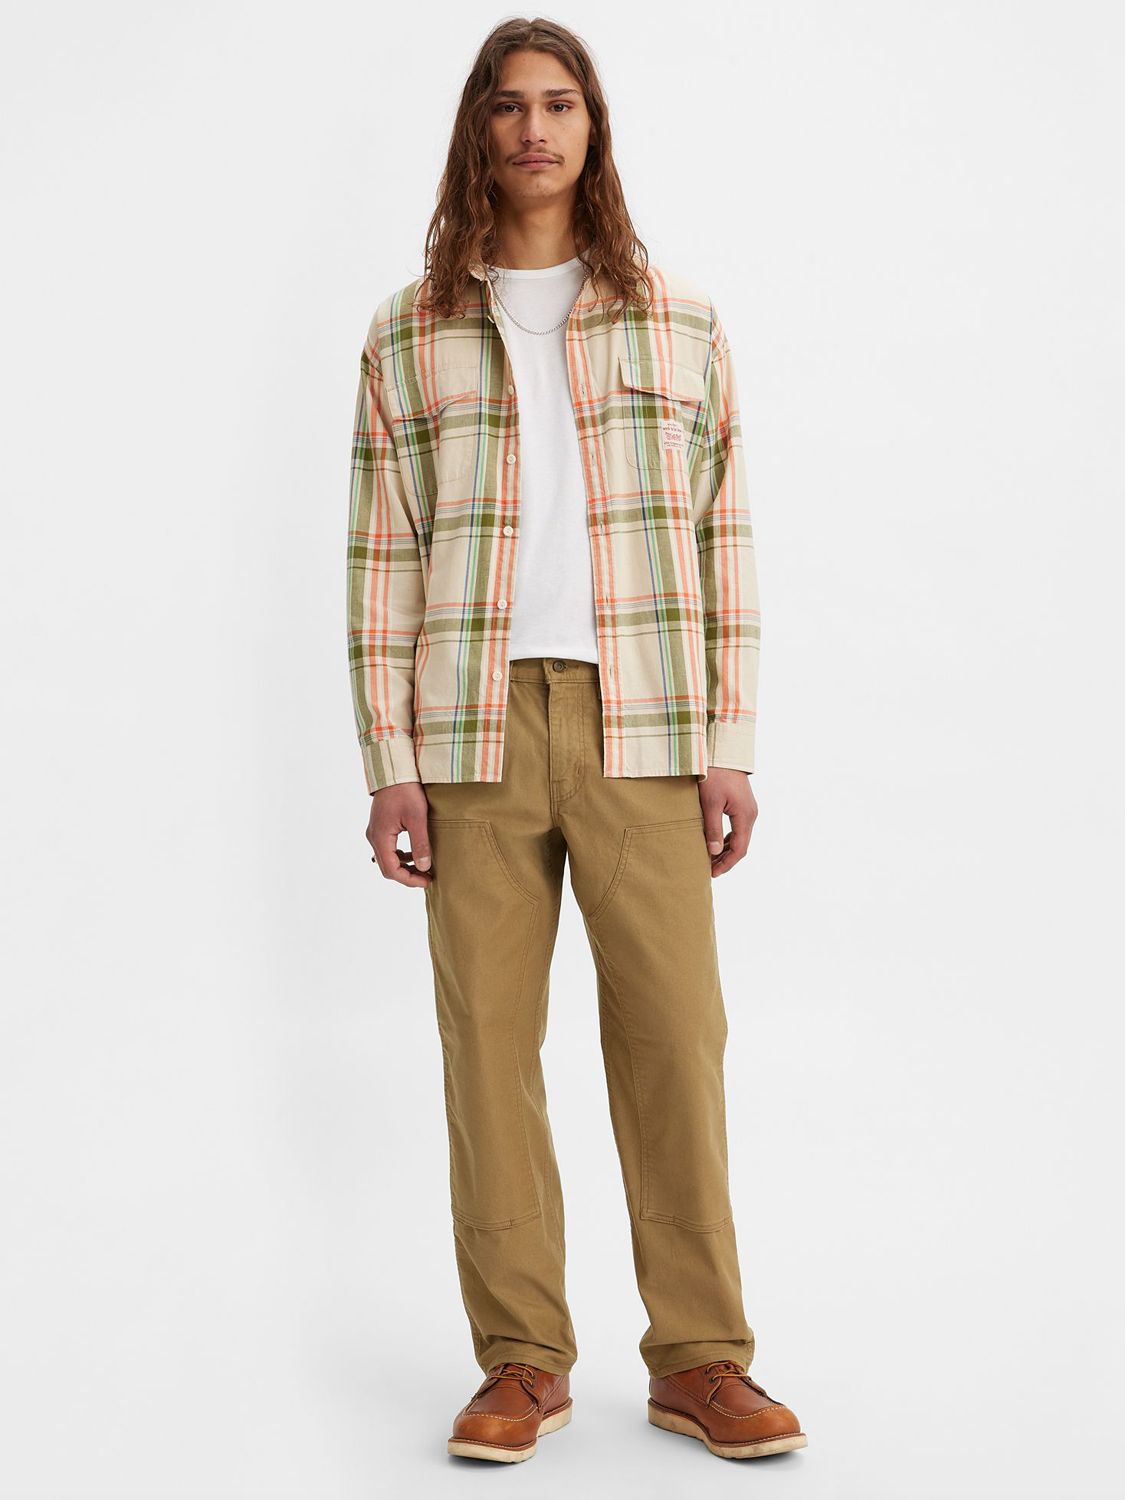 Levi's Workwear 565 Jeans, Brown at John Lewis & Partners